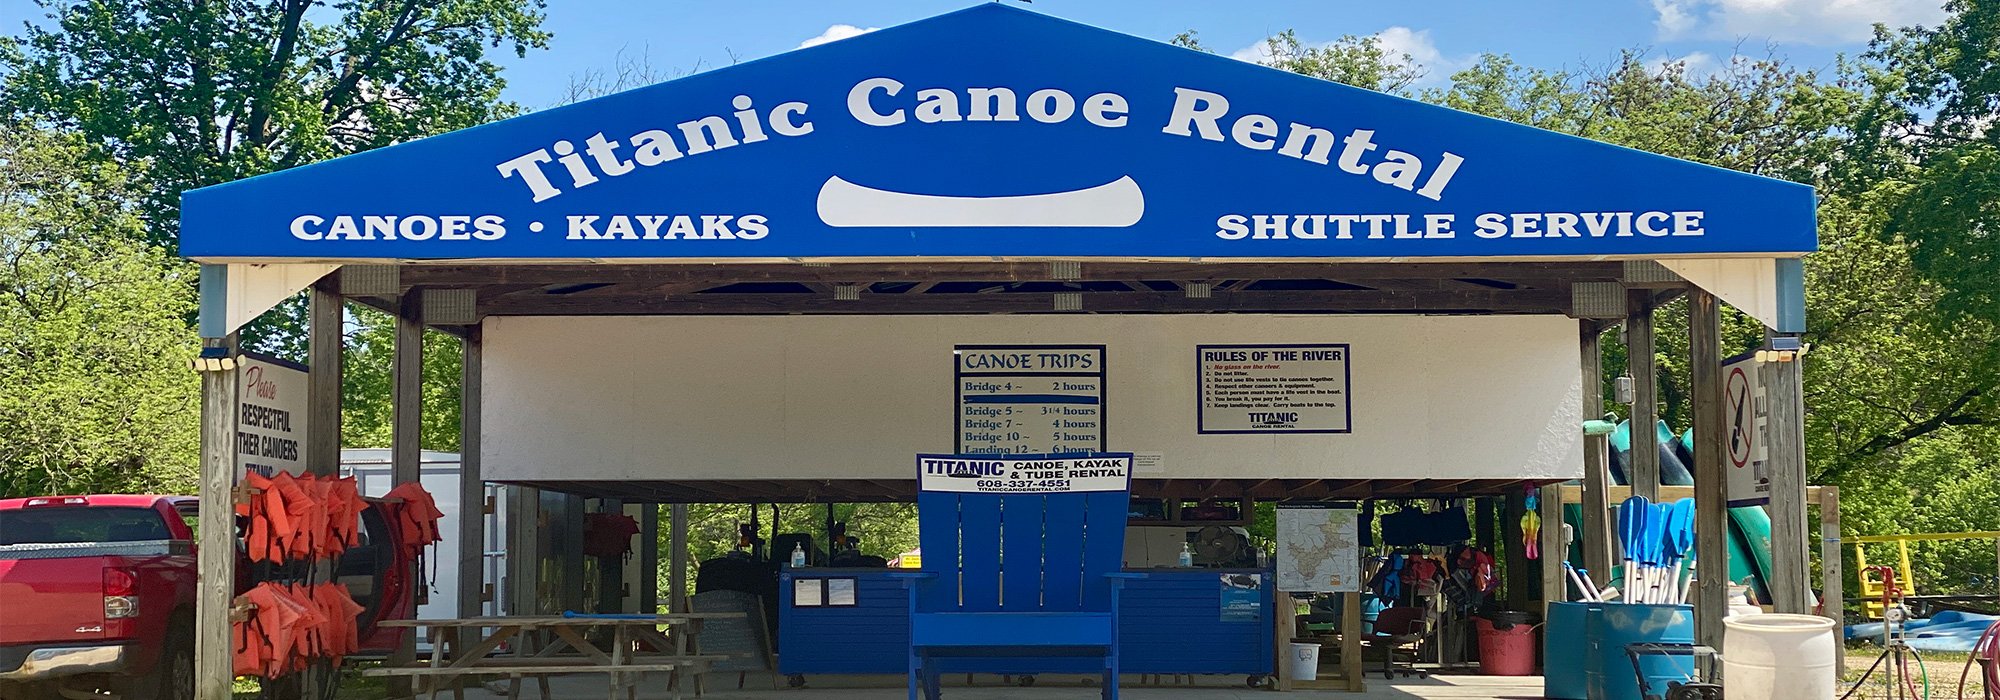 Shuttles & Car Spotting Info for Canoeing, Kayaking & Tubing on the Kickapoo River in Ontario WI